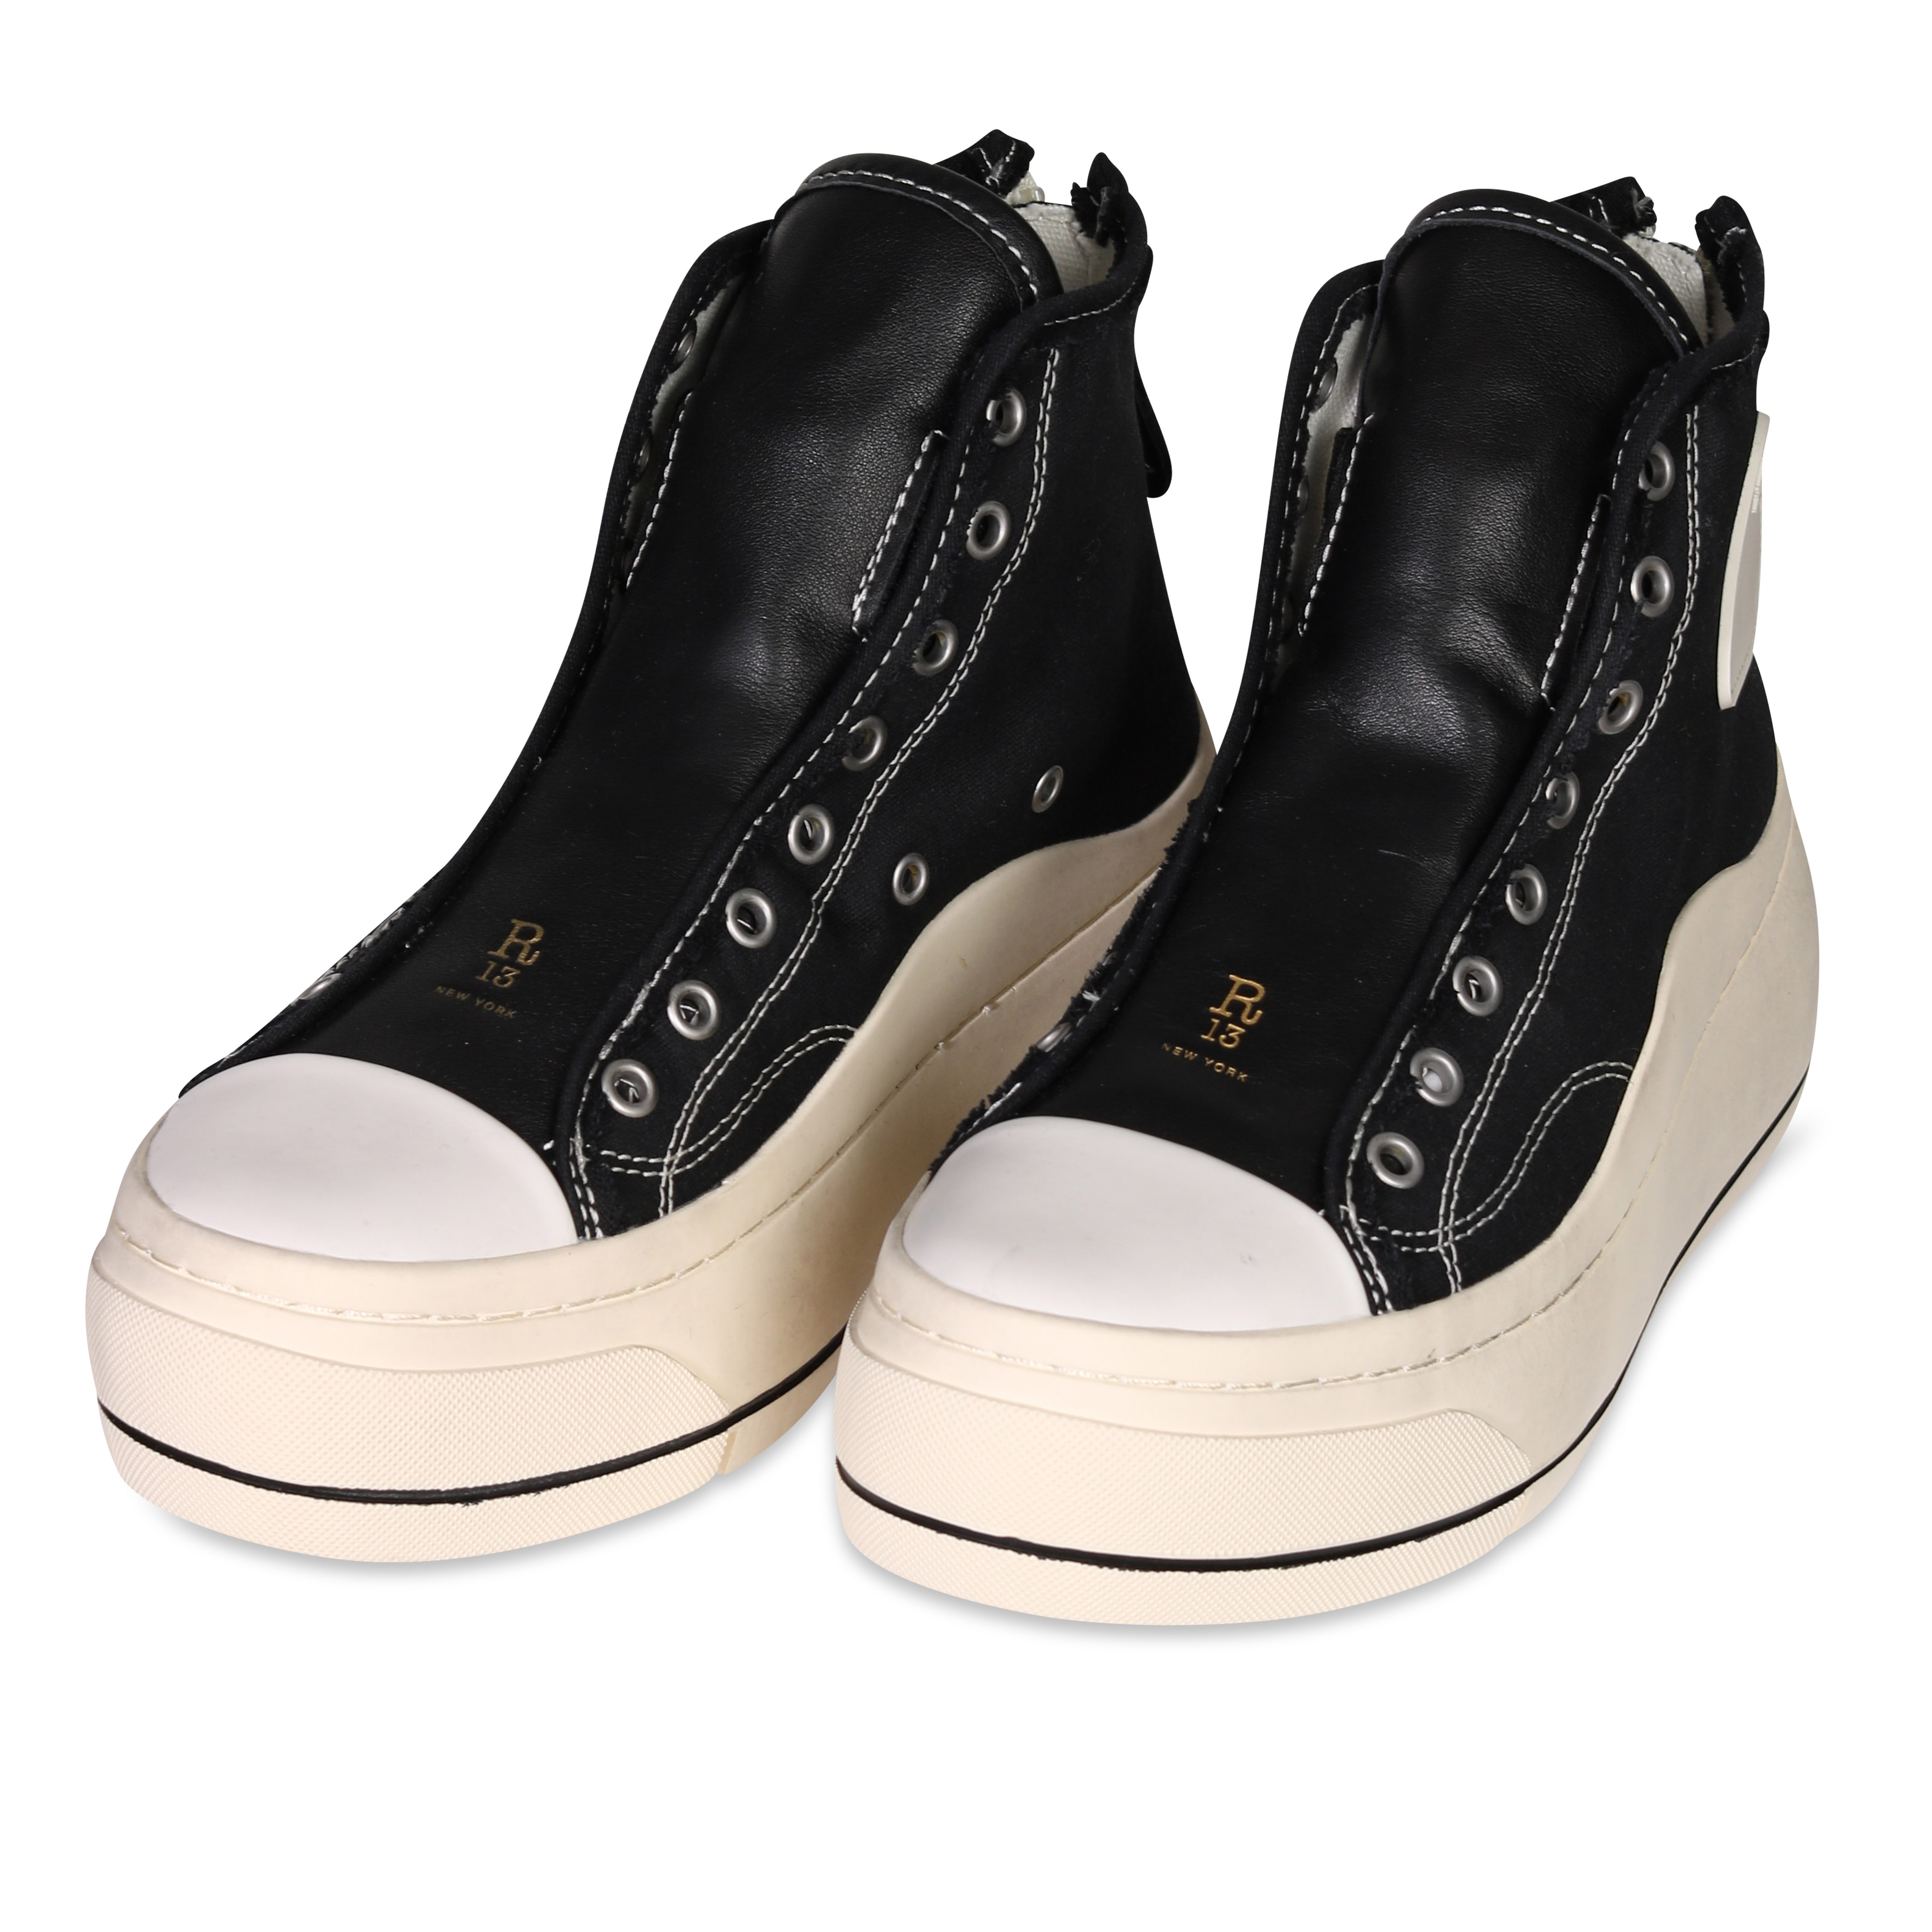 R13 High Top Sneaker Lace Free in Black 39